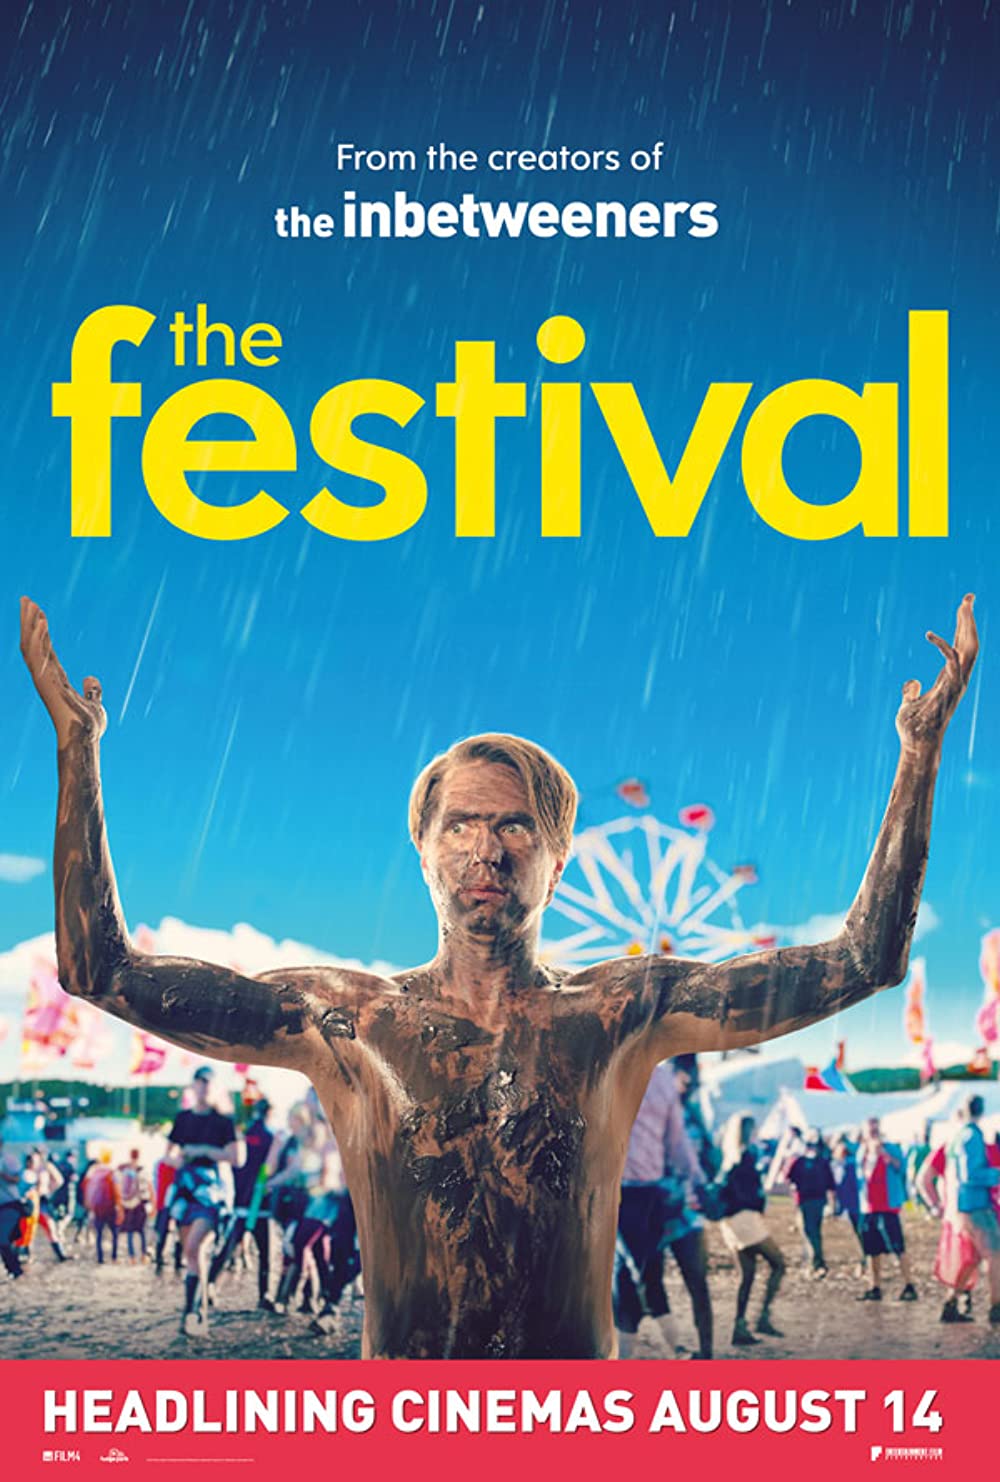 "From the creators of the inbetweeners, the festival". Man covered in mud underneath - poster